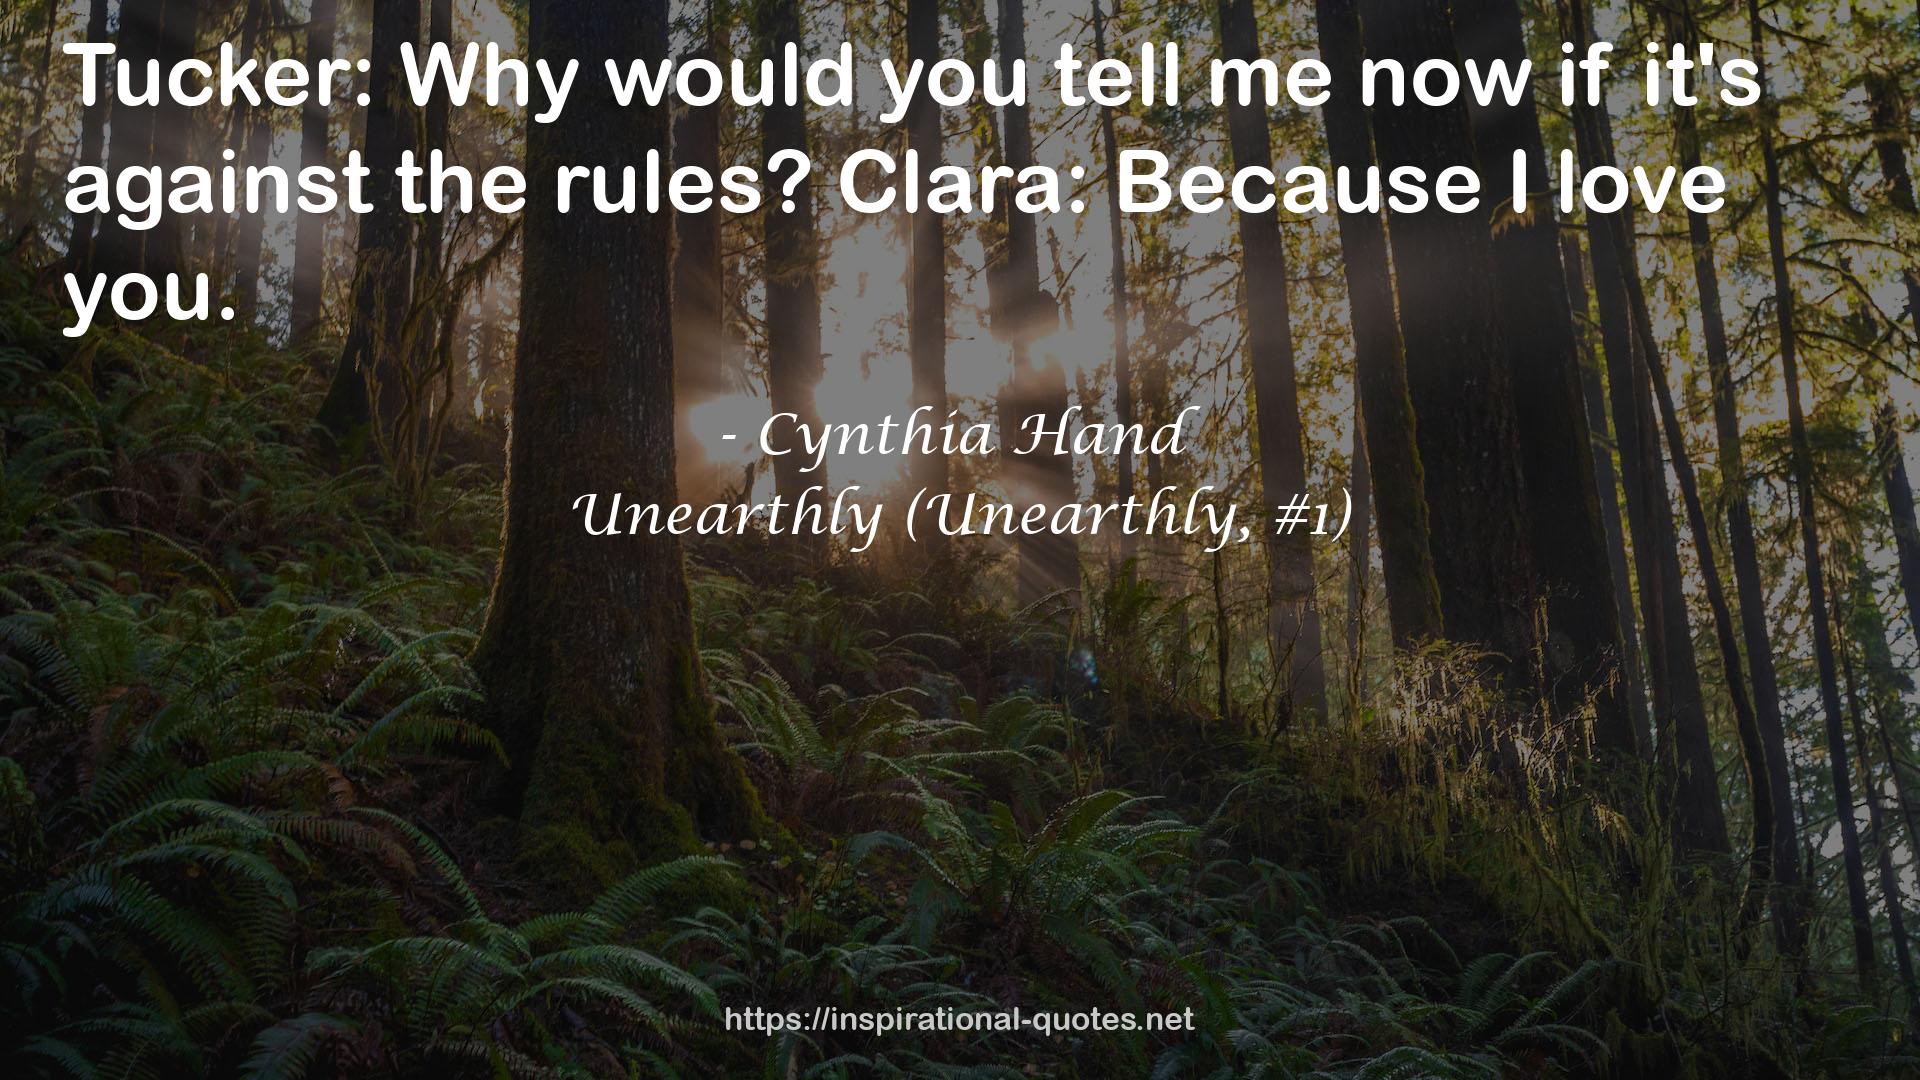 Unearthly (Unearthly, #1) QUOTES